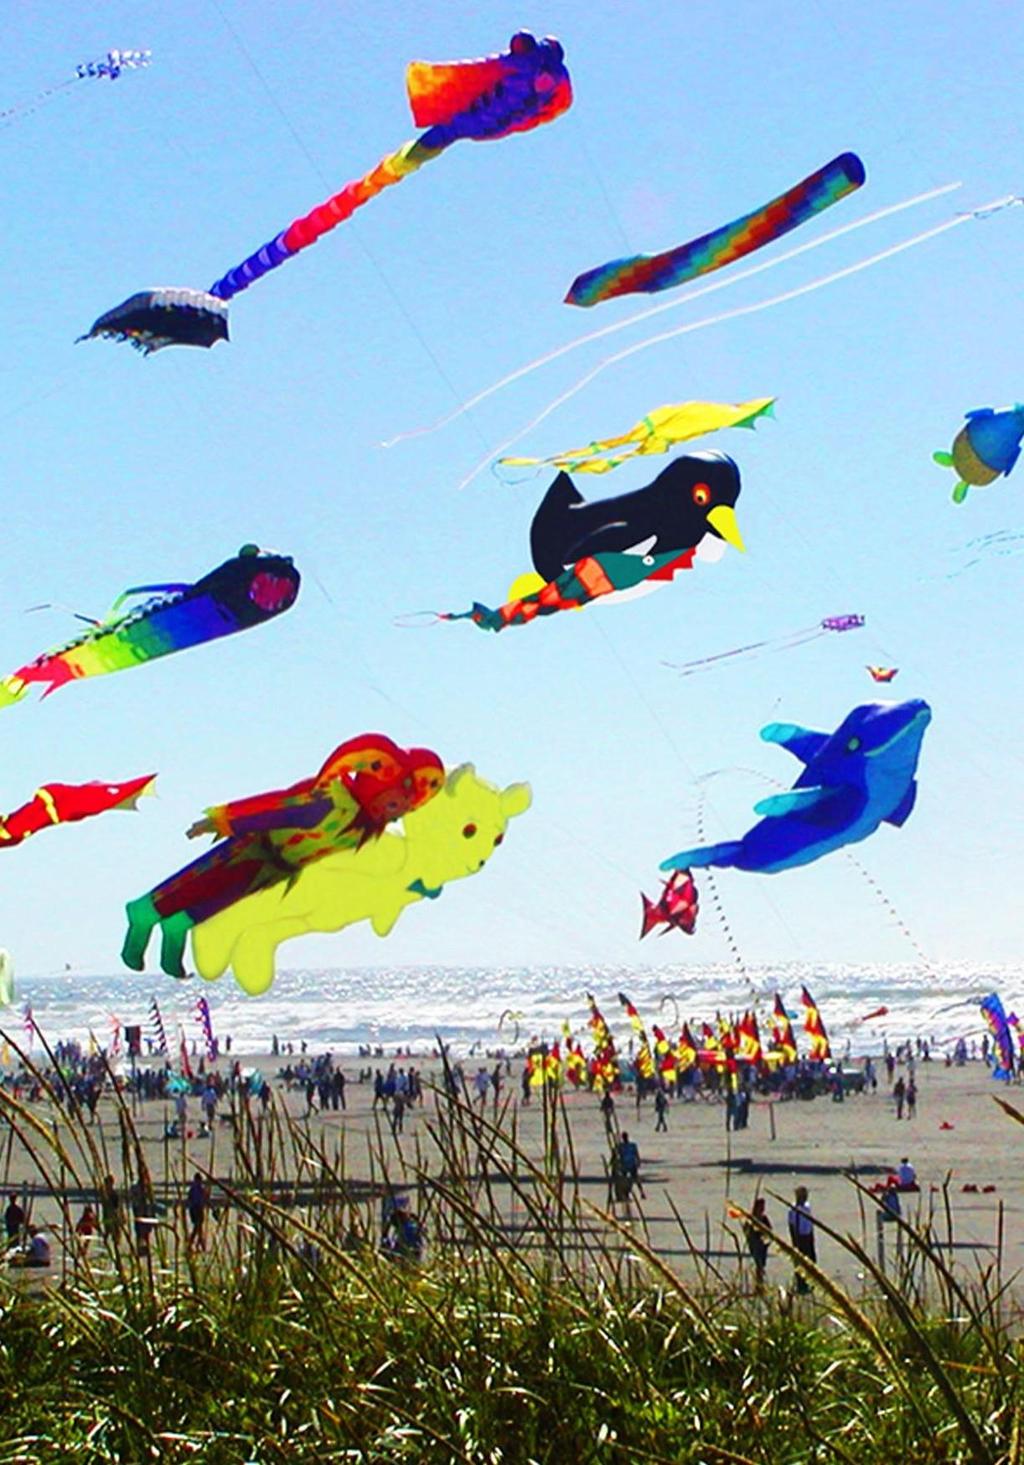 Kite flying is more than a pastime in Afghanistan -- it is a national obsession.